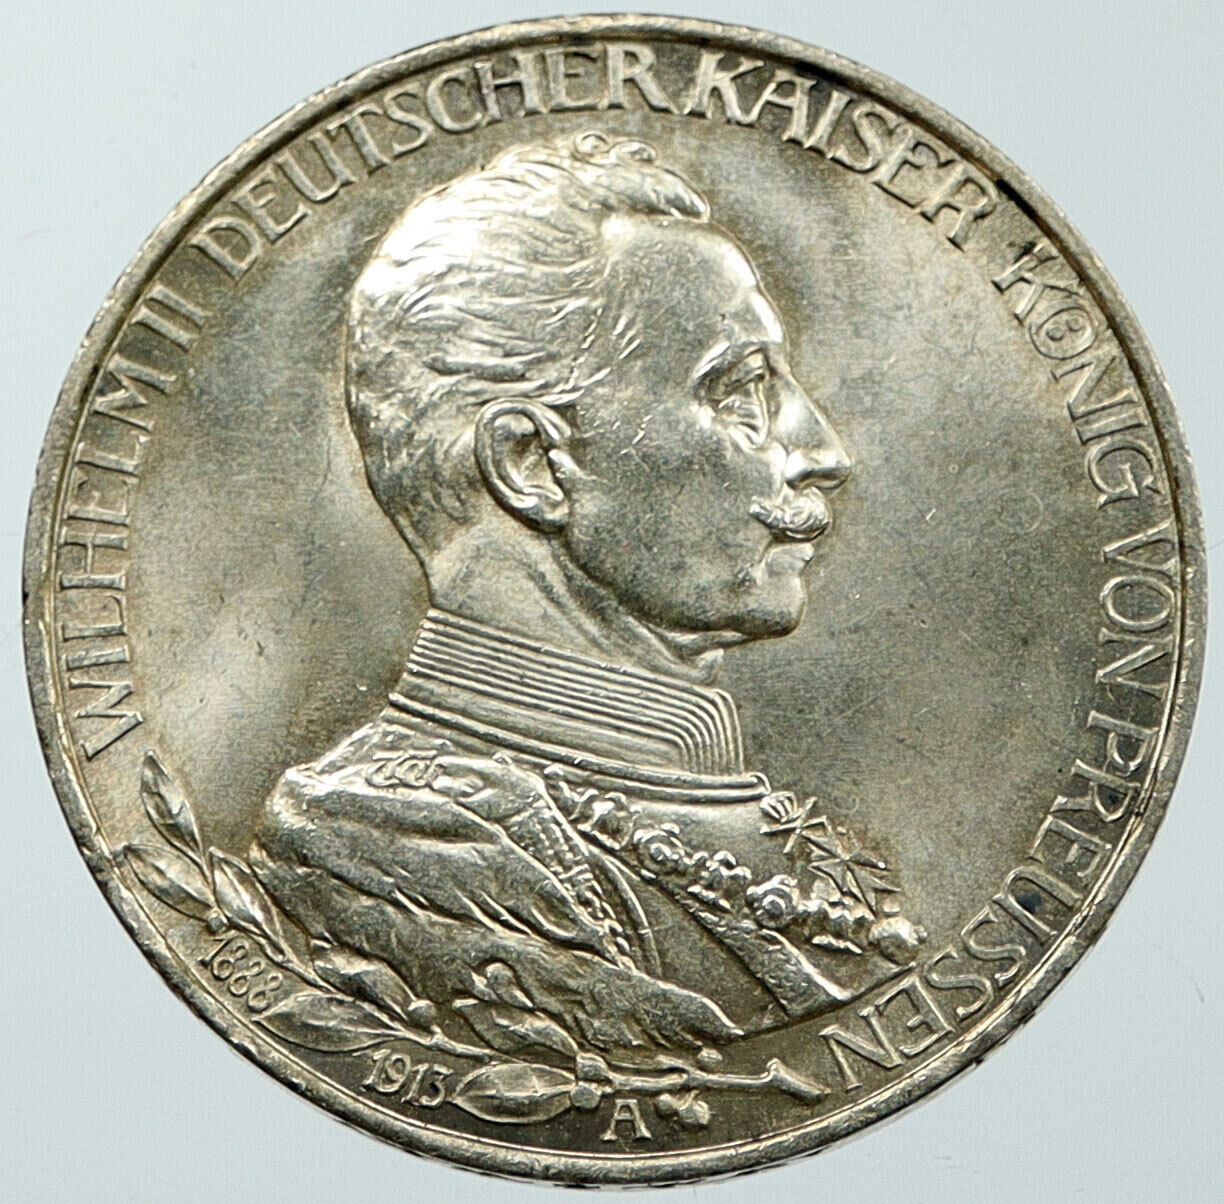 1913 A GERMANY GERMAN STATES PRUSSIA WILHELM II Old Silver 3 Marks Coin i116583